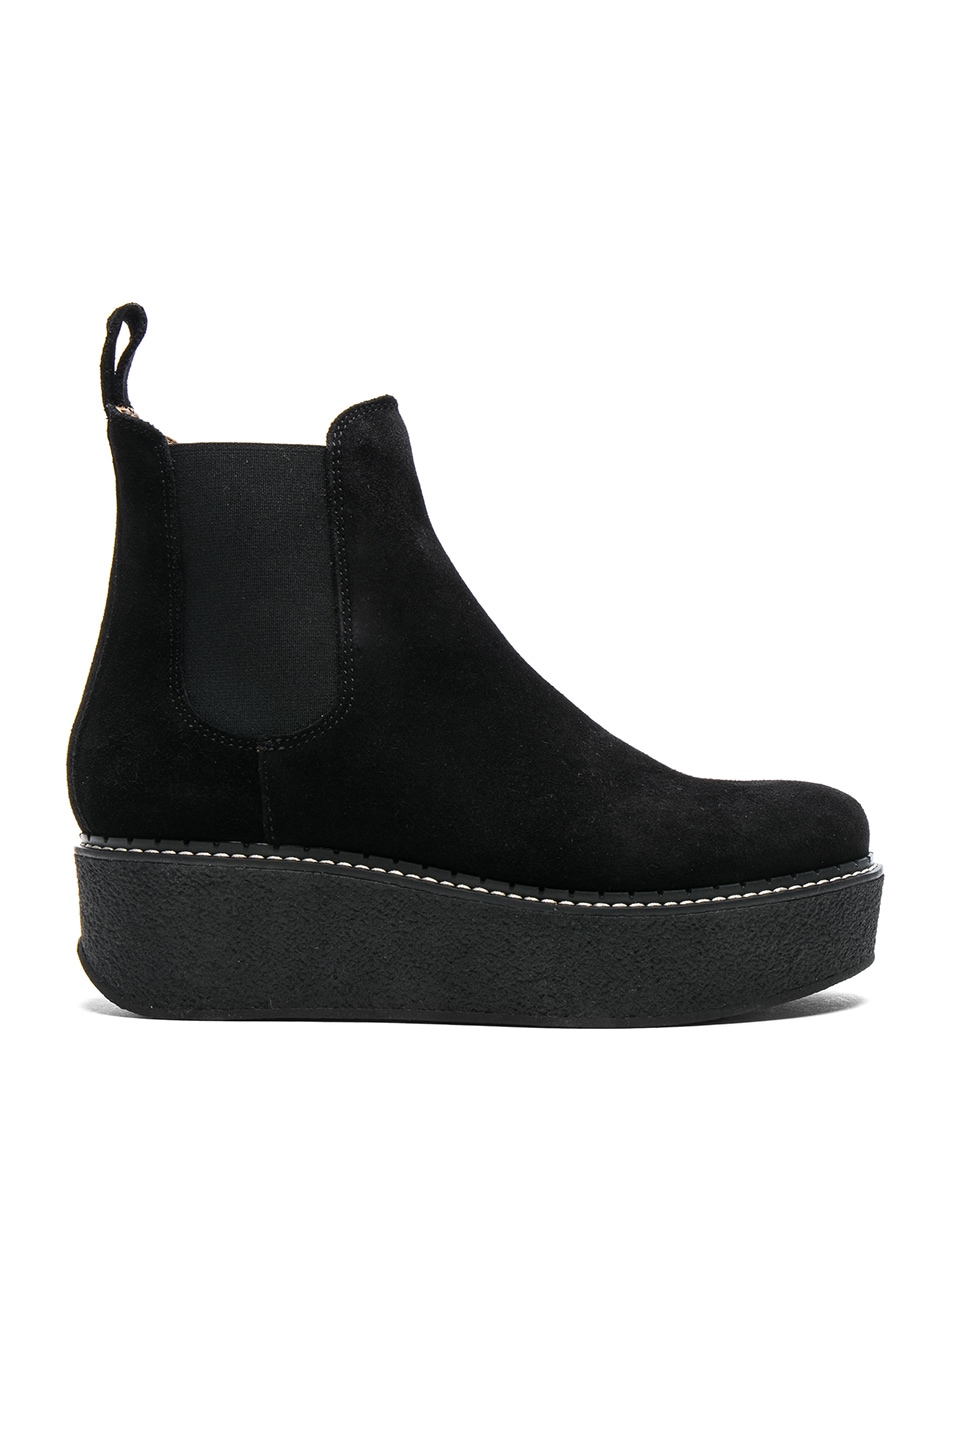 Image 1 of Flamingos Suede Gibus Boots in Black